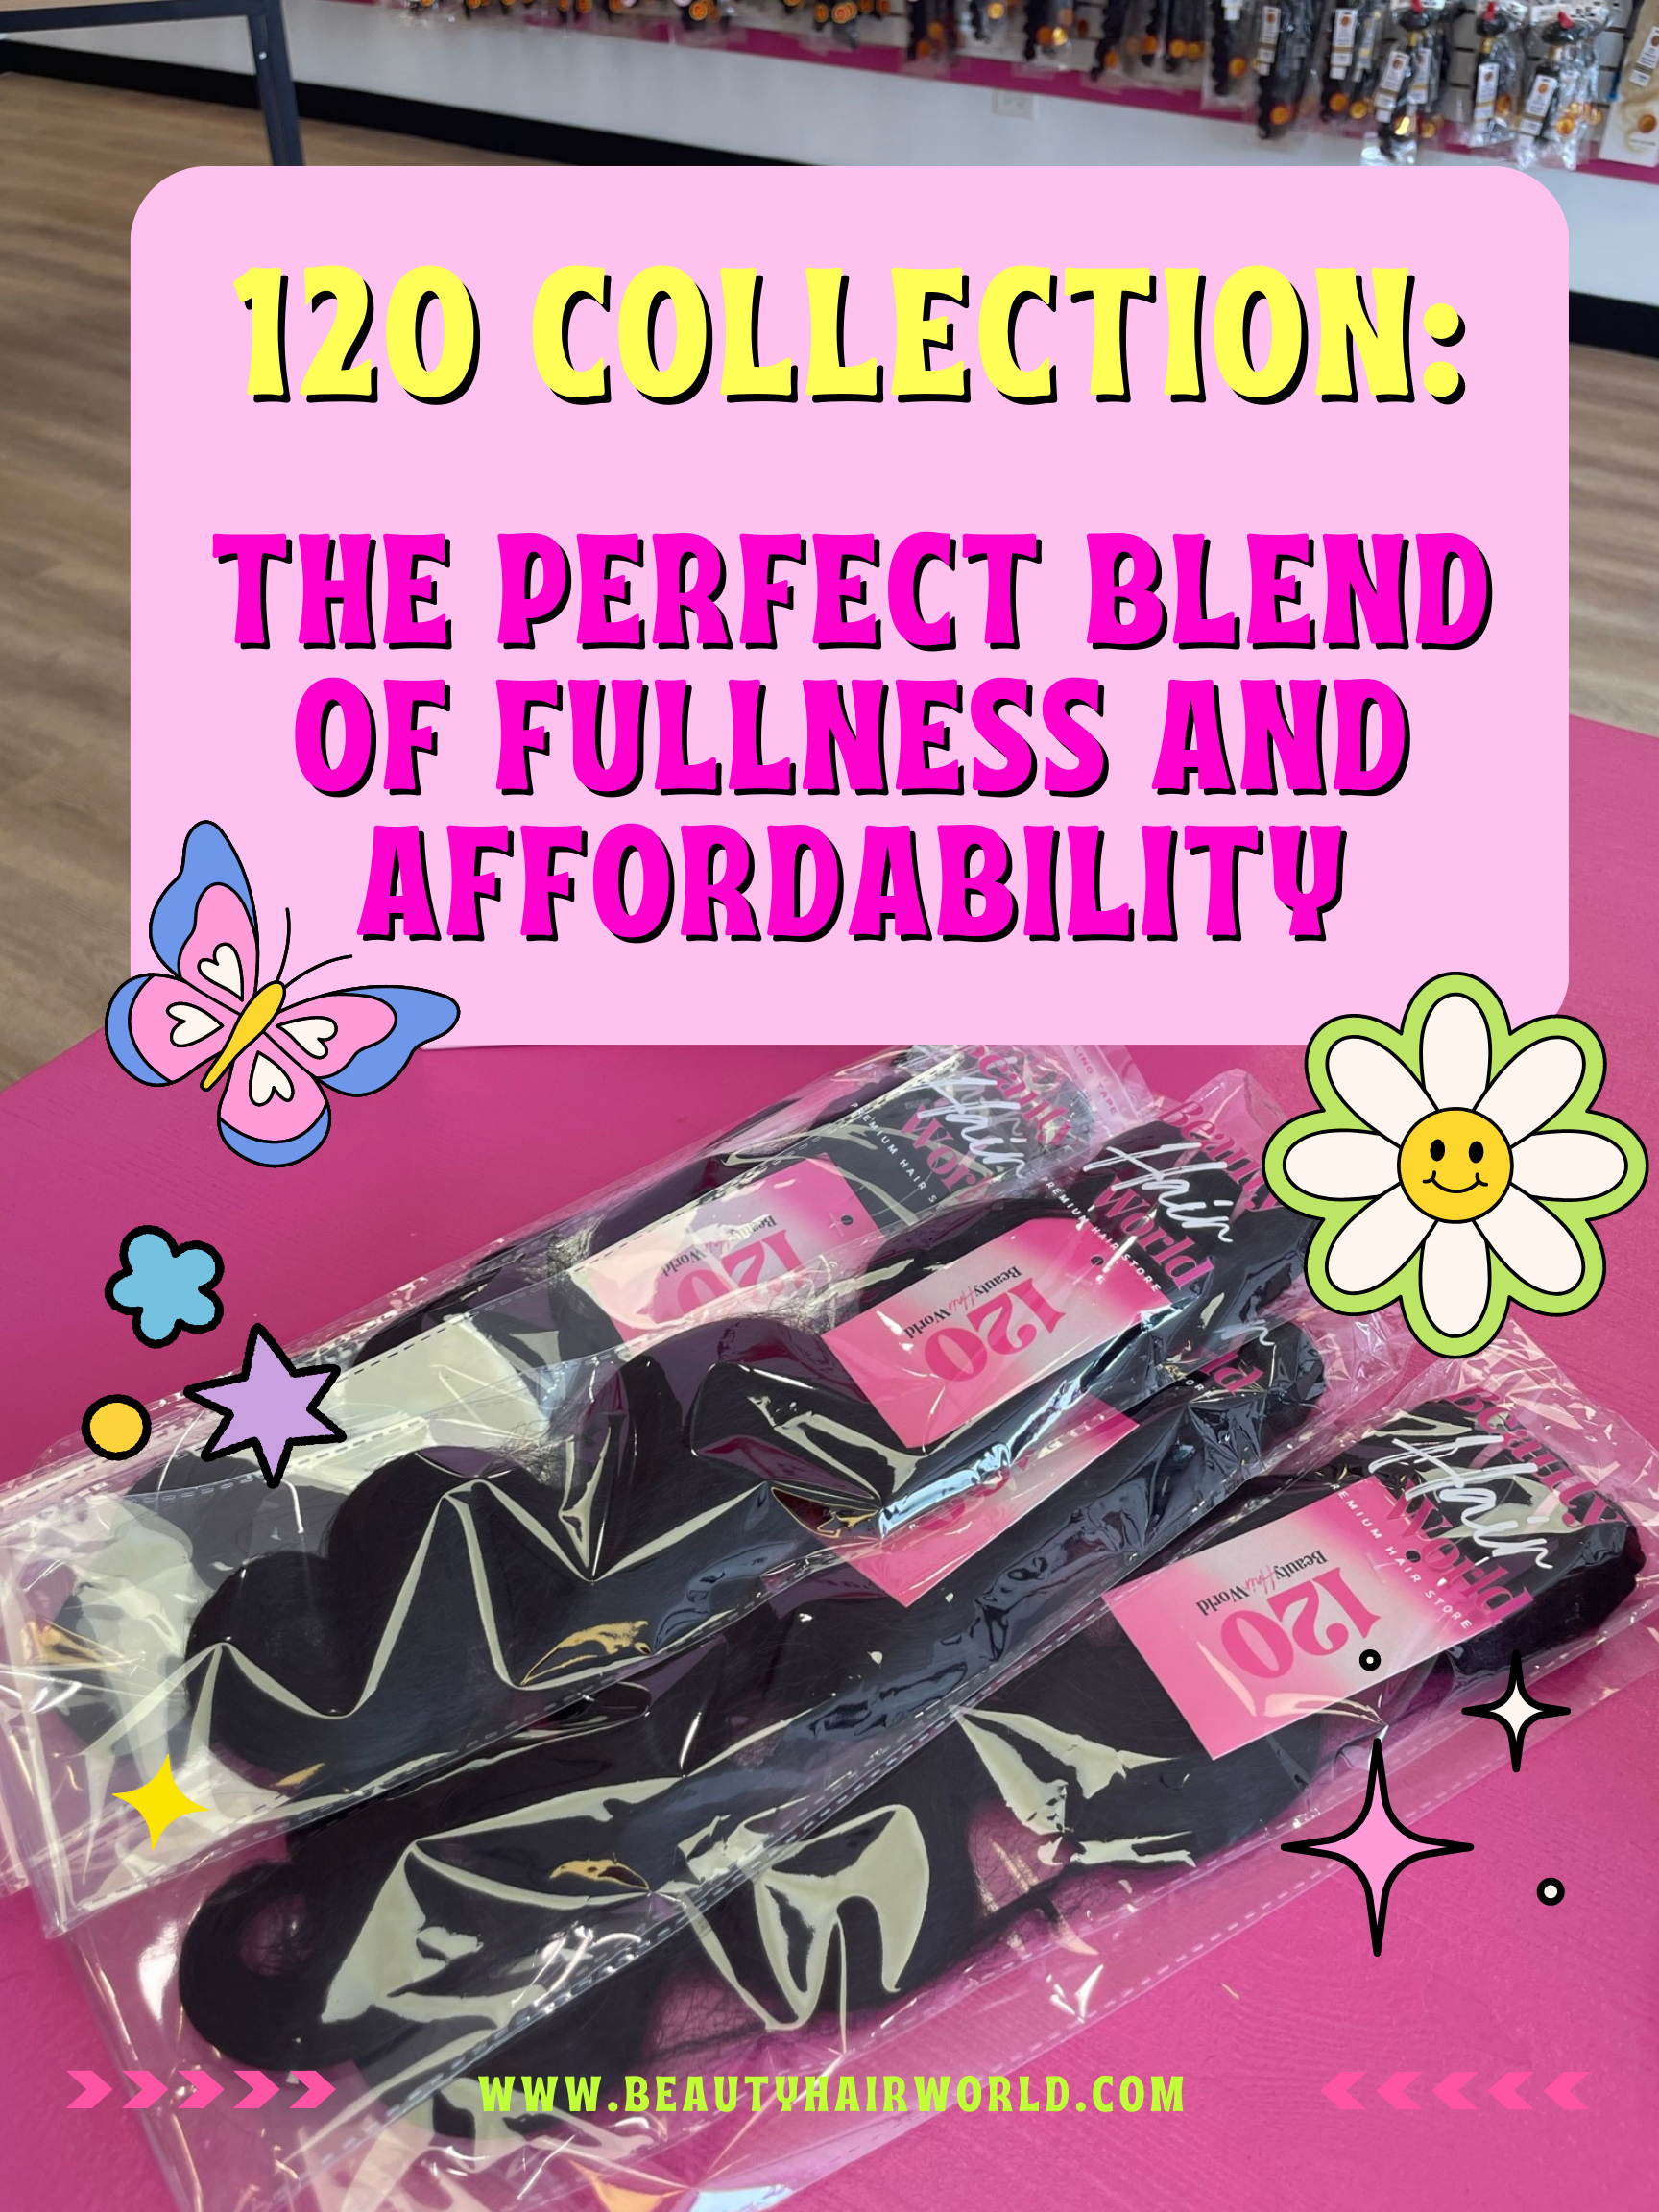 Beautyhairworld's 120 collection: The Perfect Blend of Fullness and Affordability